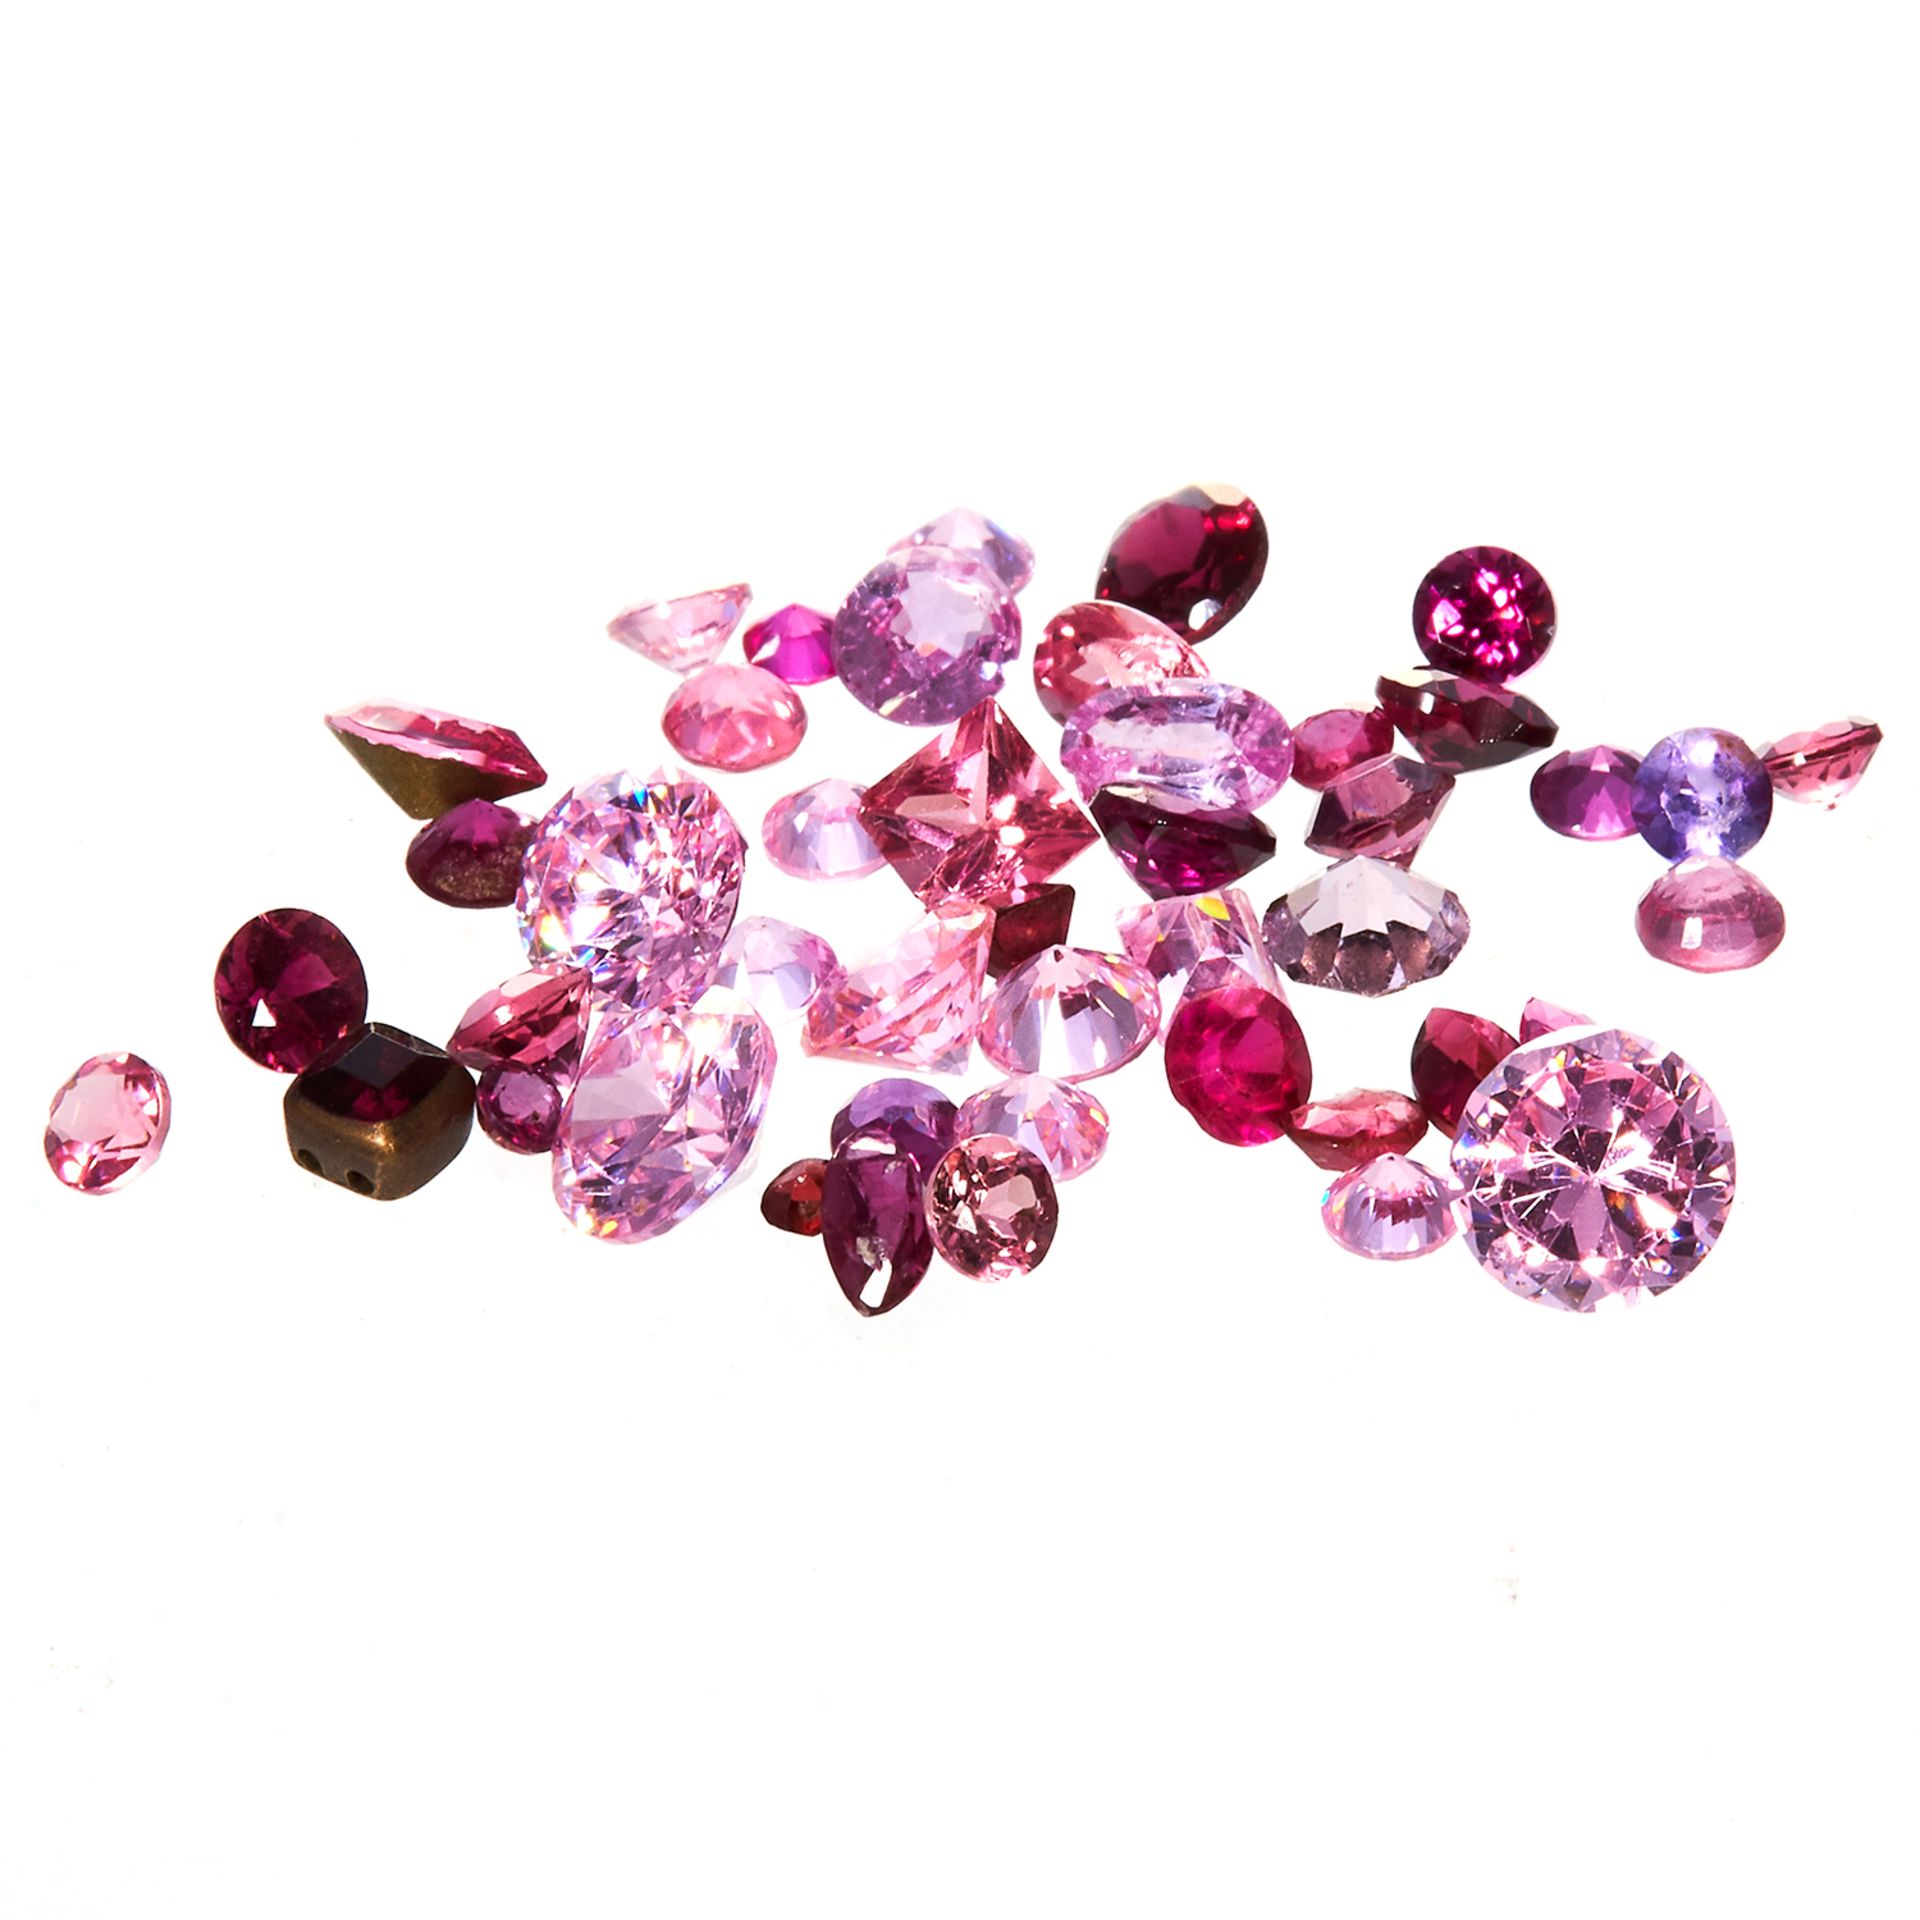 A 15.0 CARAT PARCEL OF STONES possibly to include ruby, CZ, garnet, etc.